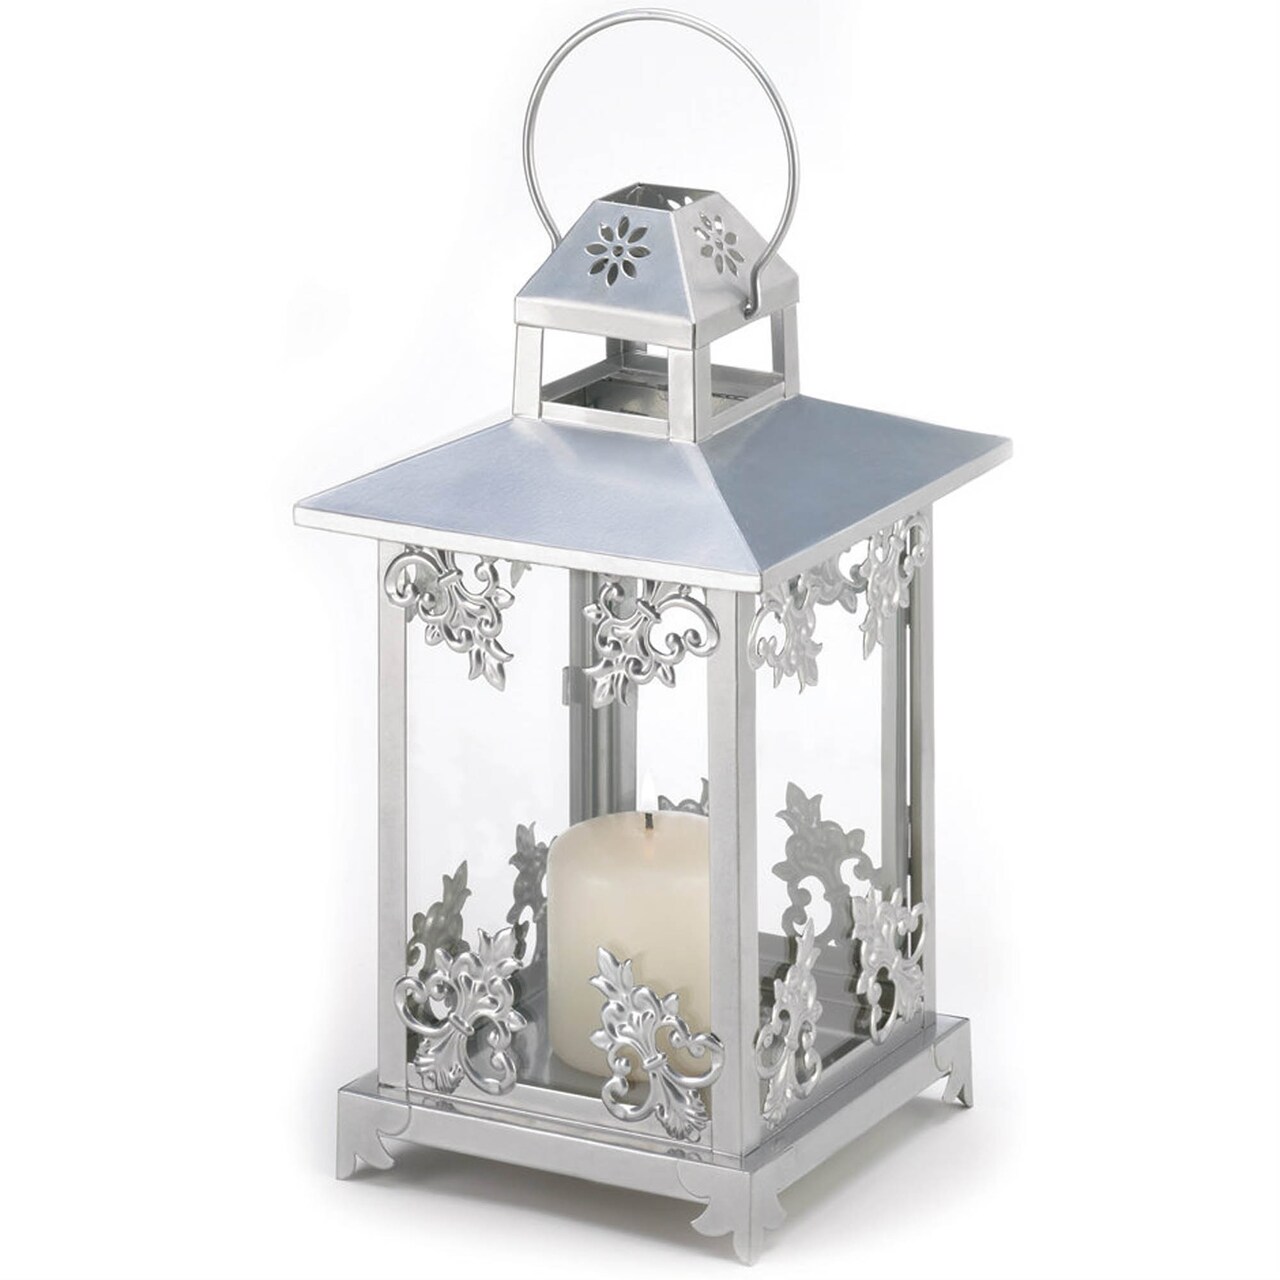 Accent Plus Home Decorative Silver Scrolls Candle Lantern - 15.5 inches